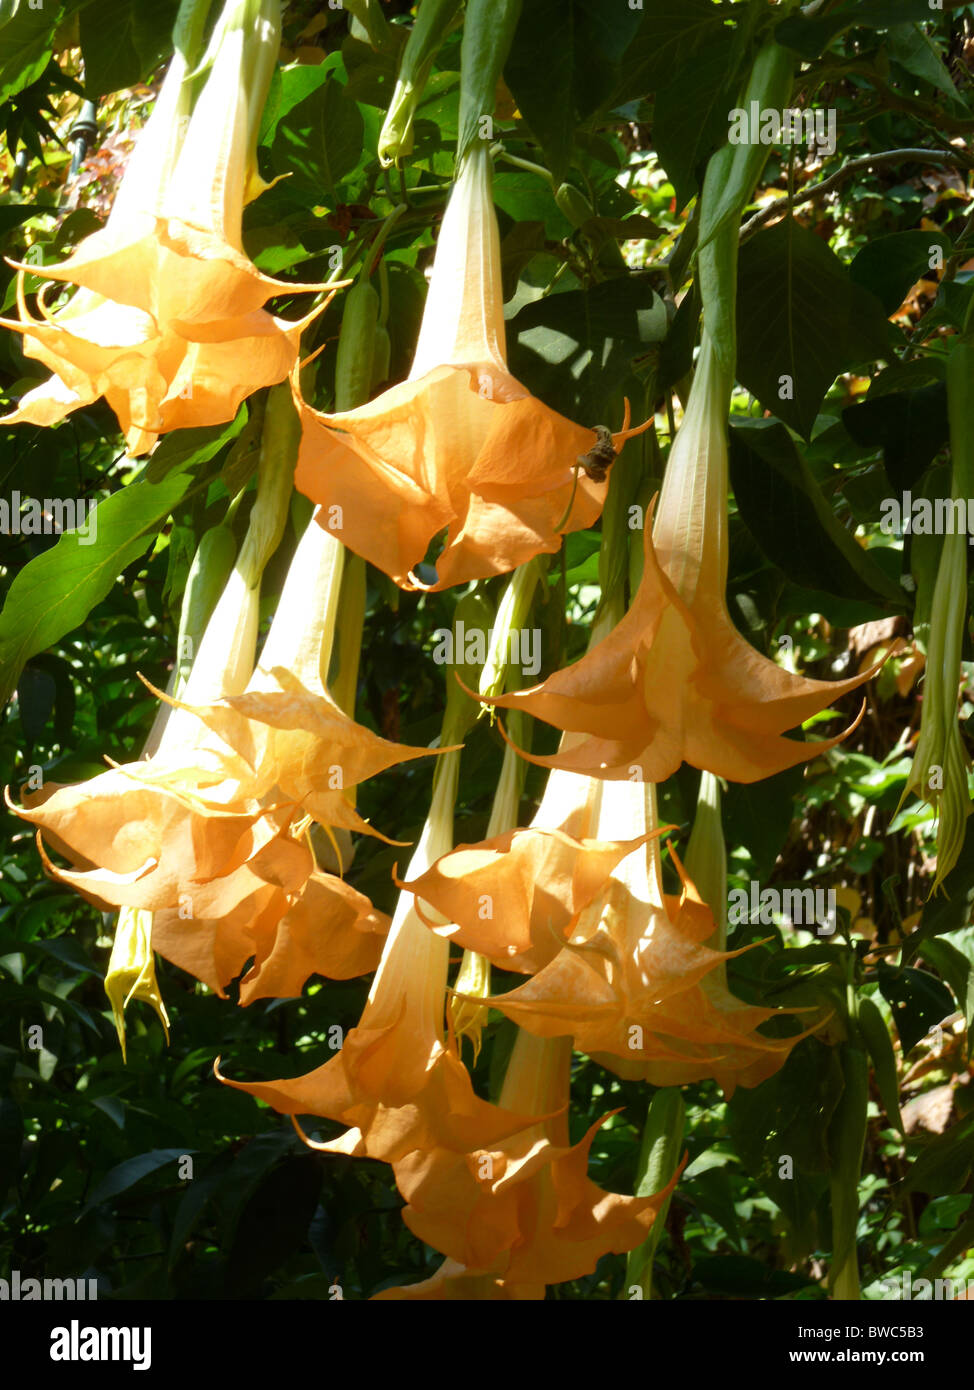 Brugmansia x candida 'Grand Marnier' or Angels' Trumpets Stock Photo